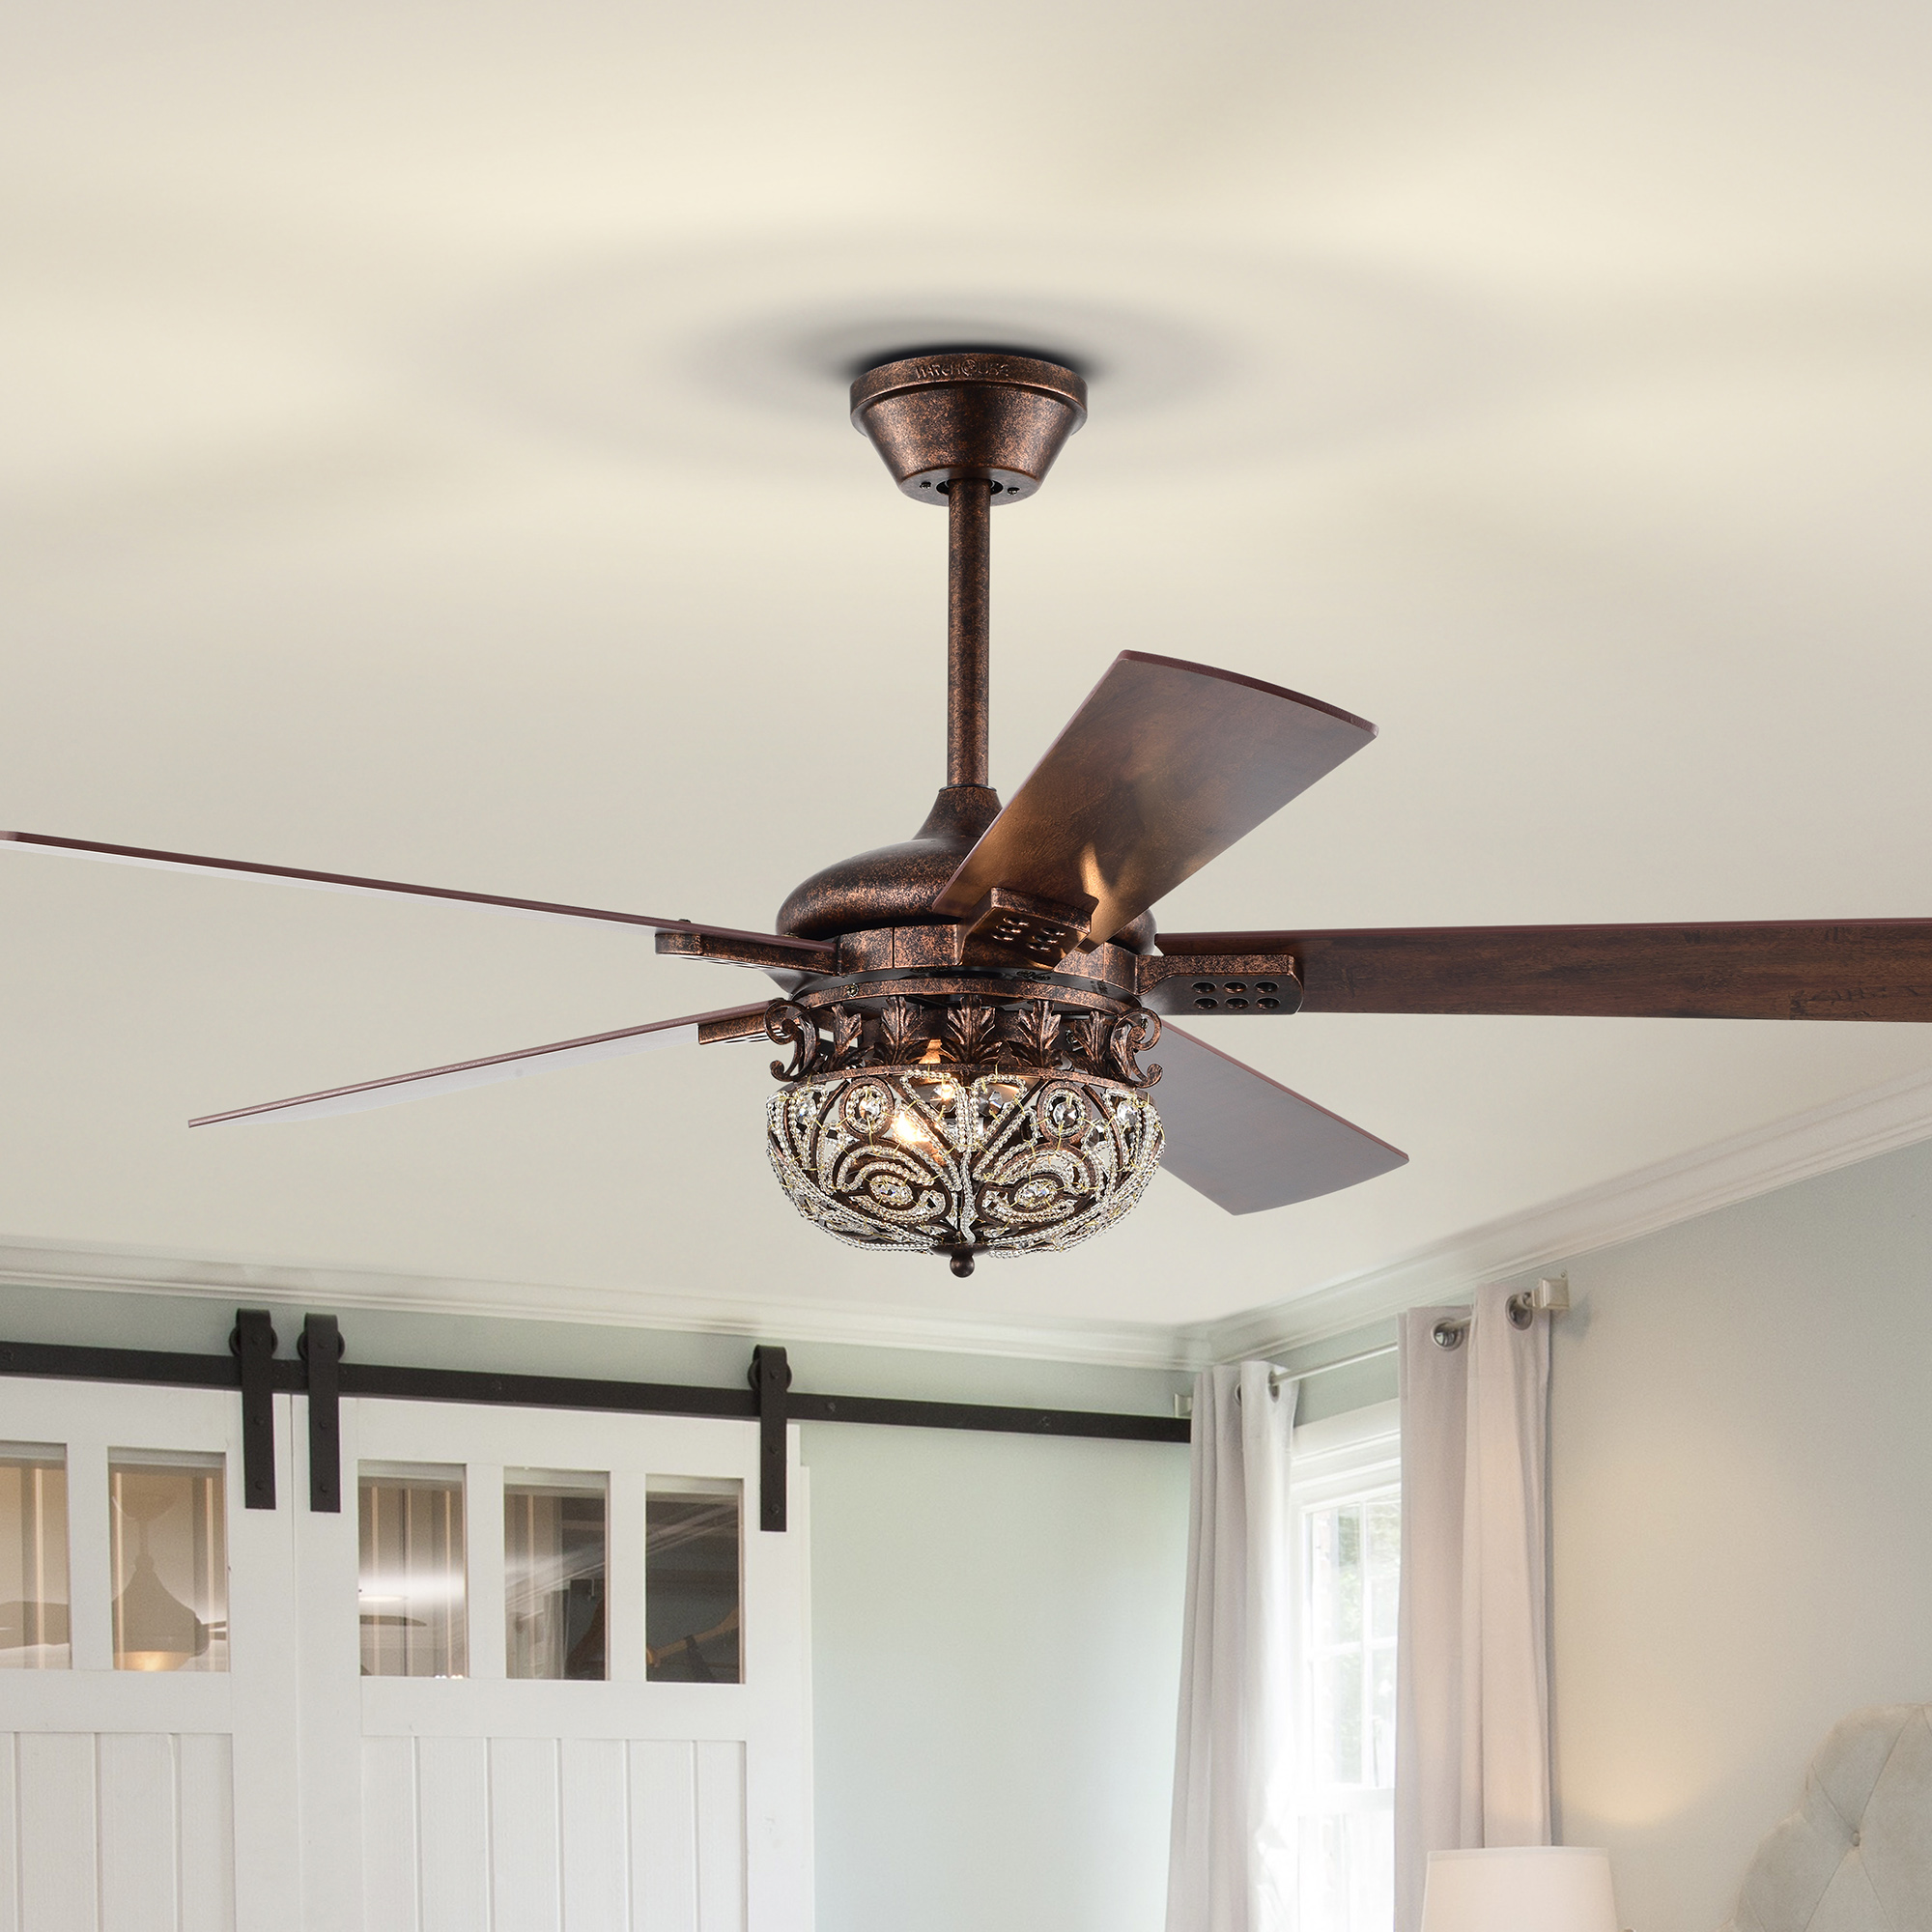 Laylani 52 in. 2-Light Indoor Antique Copper Finish Ceiling Fan with Light Kit and Remote